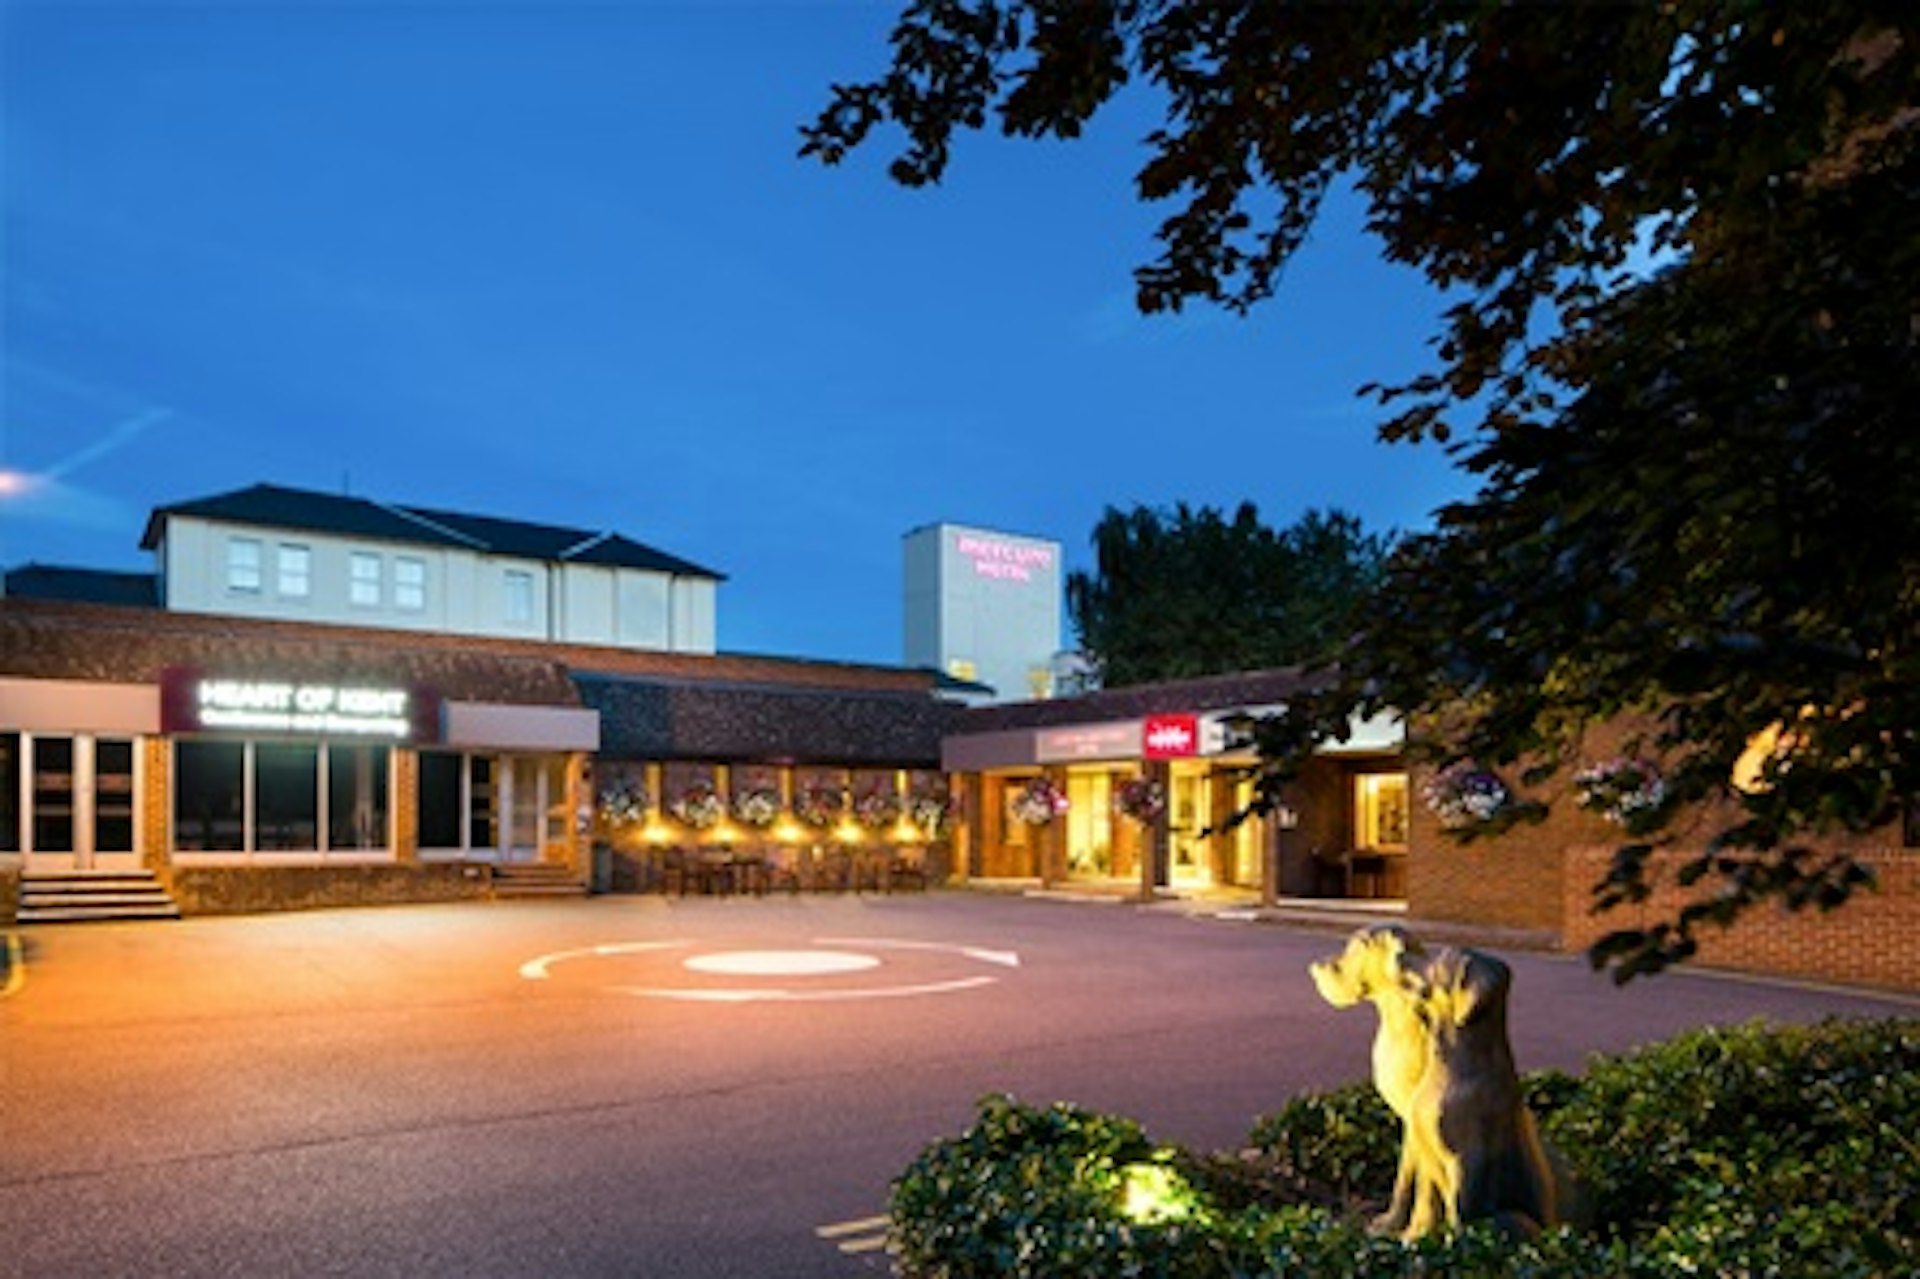 One Night Break for Two at the Mercure Maidstone Great Danes Hotel 3